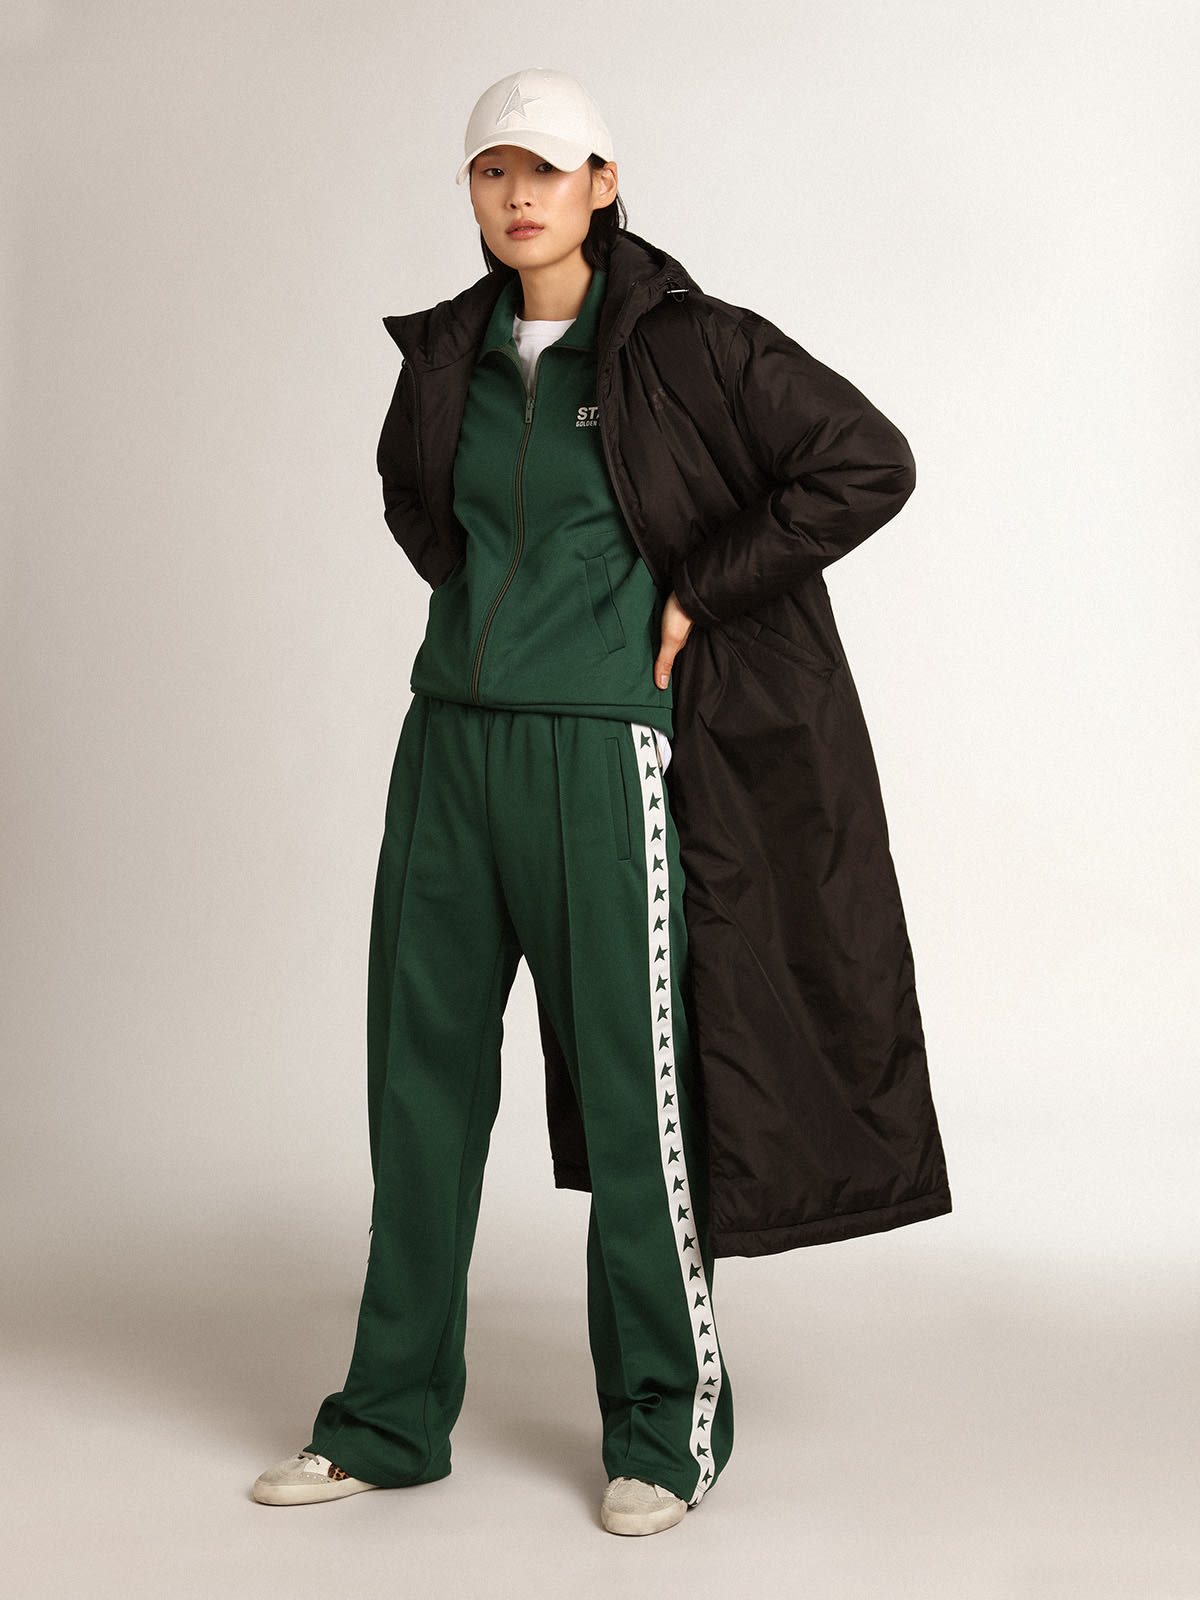 Golden Goose - Bright-green Dorotea Star Collection jogging pants with contrasting strip and stars in 